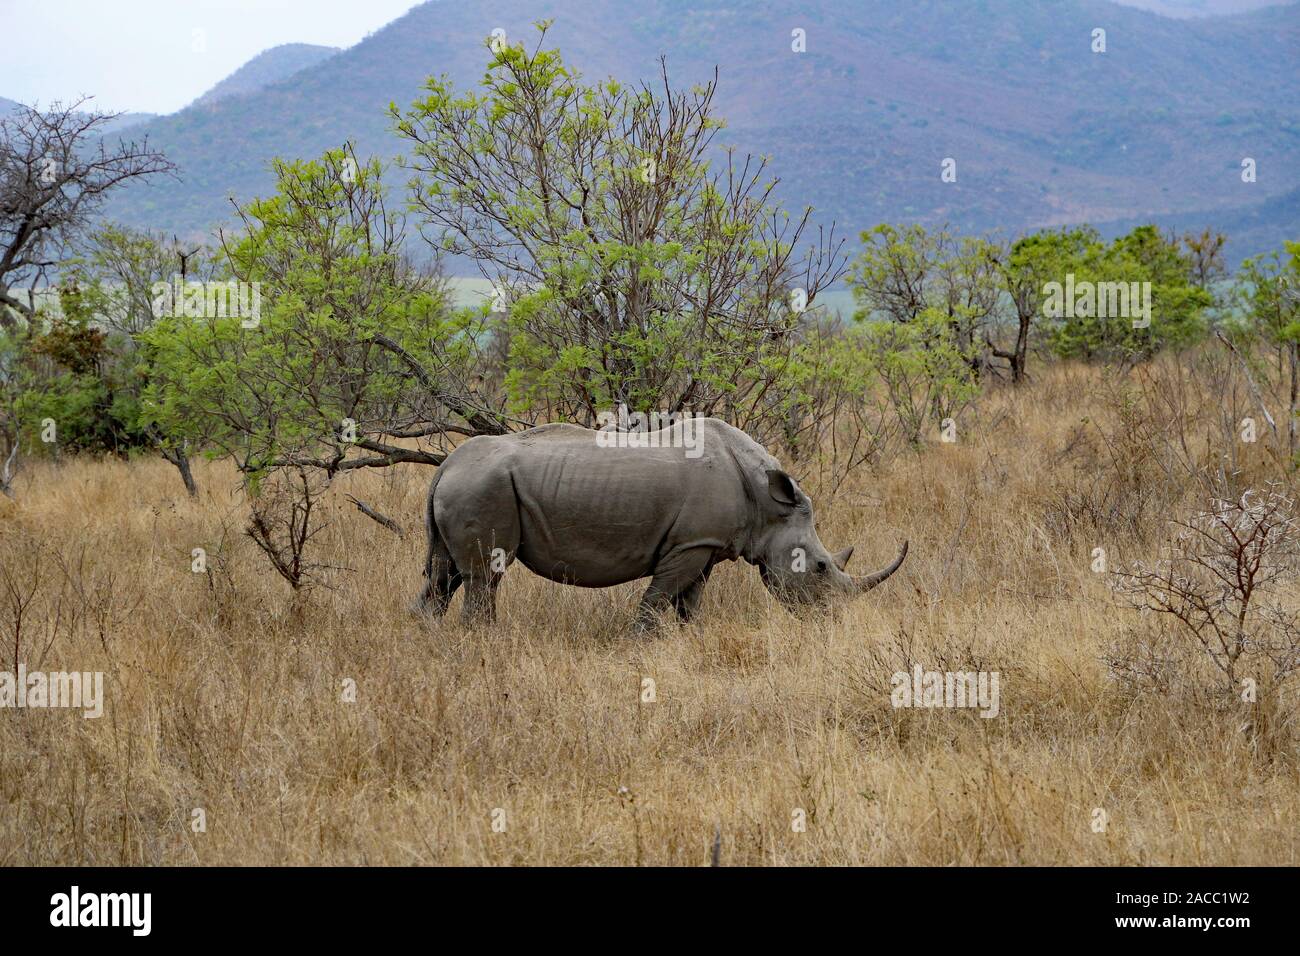 Rhino in Kruger National Park South Africa nature Stock Photo